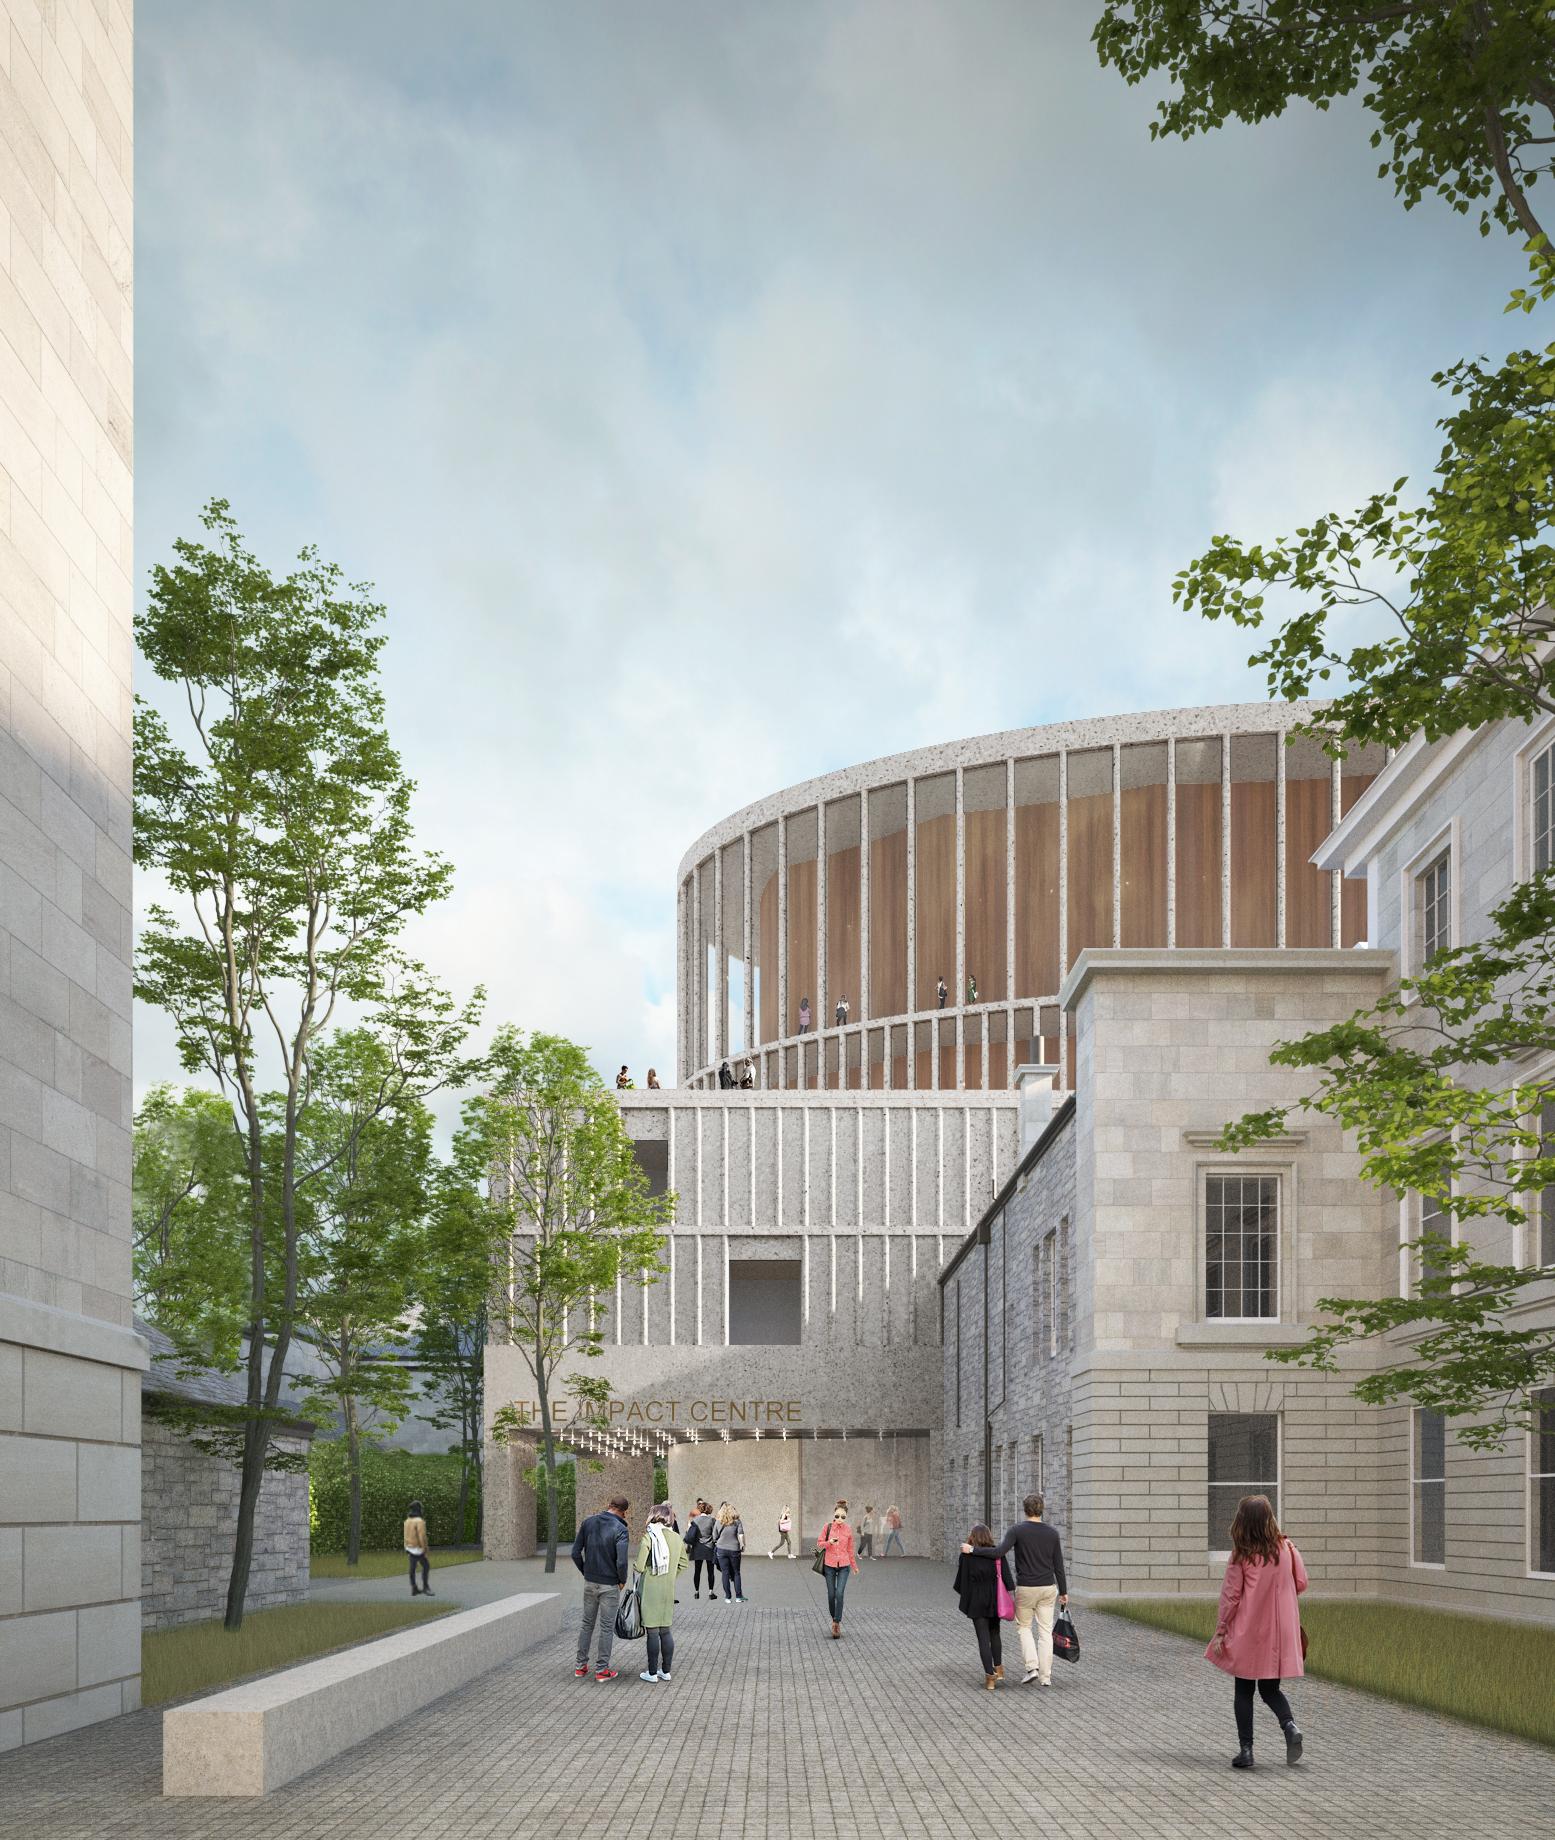 The venue, situated behind the historic Dundas House at 36 St Andrew Square, will be the permanent home of the Scottish Chamber Orchestra (SCO) / The IMPACT Centre